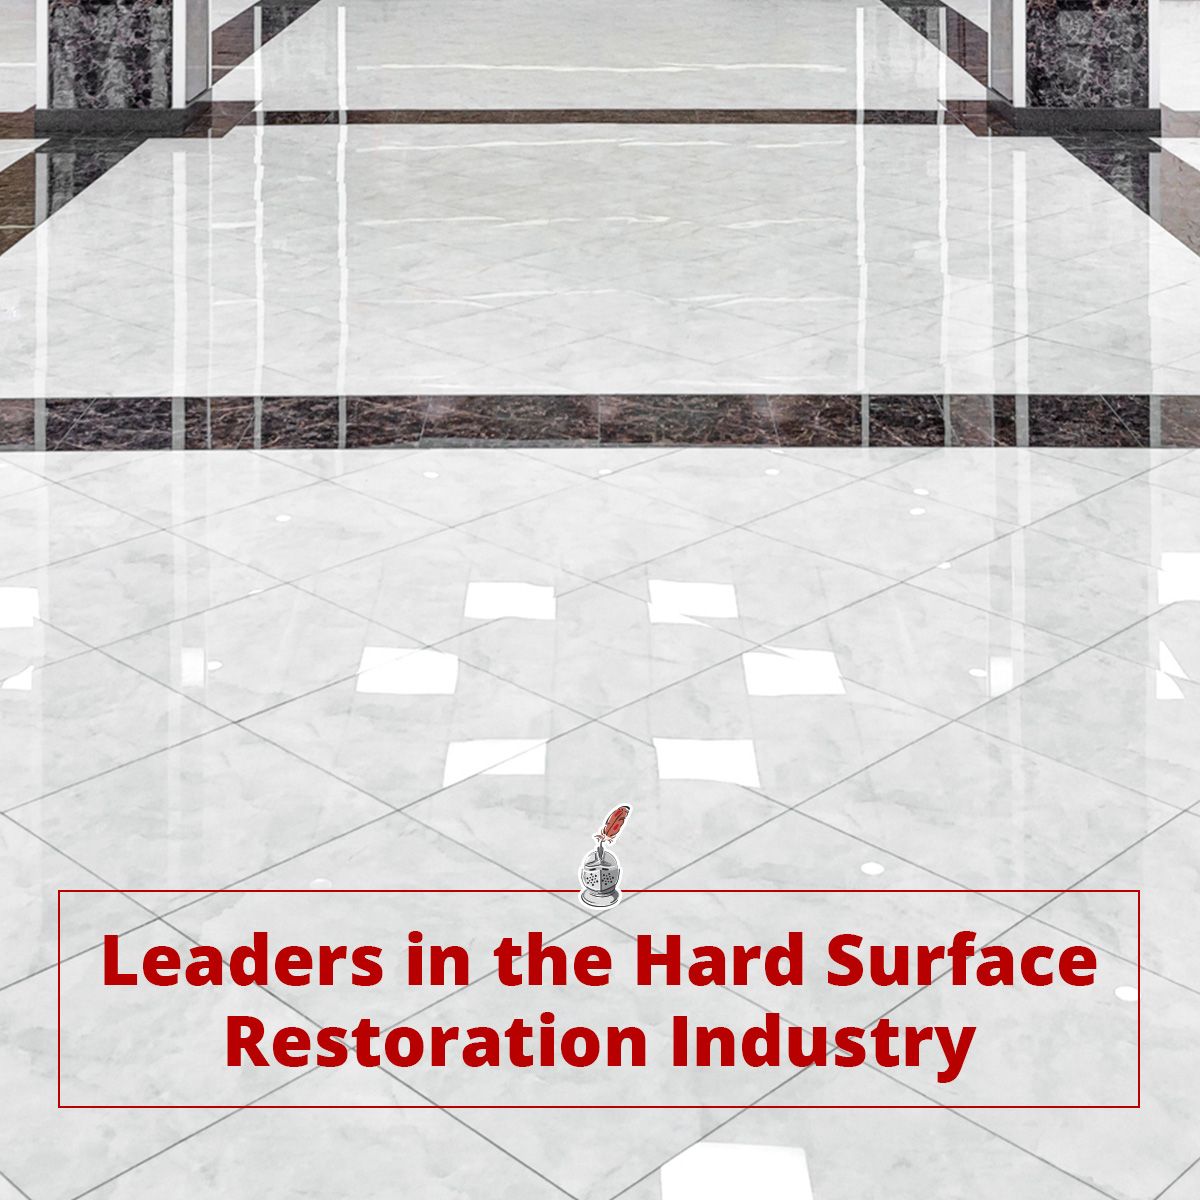 Leaders in the Hard Surface Restoration Industry